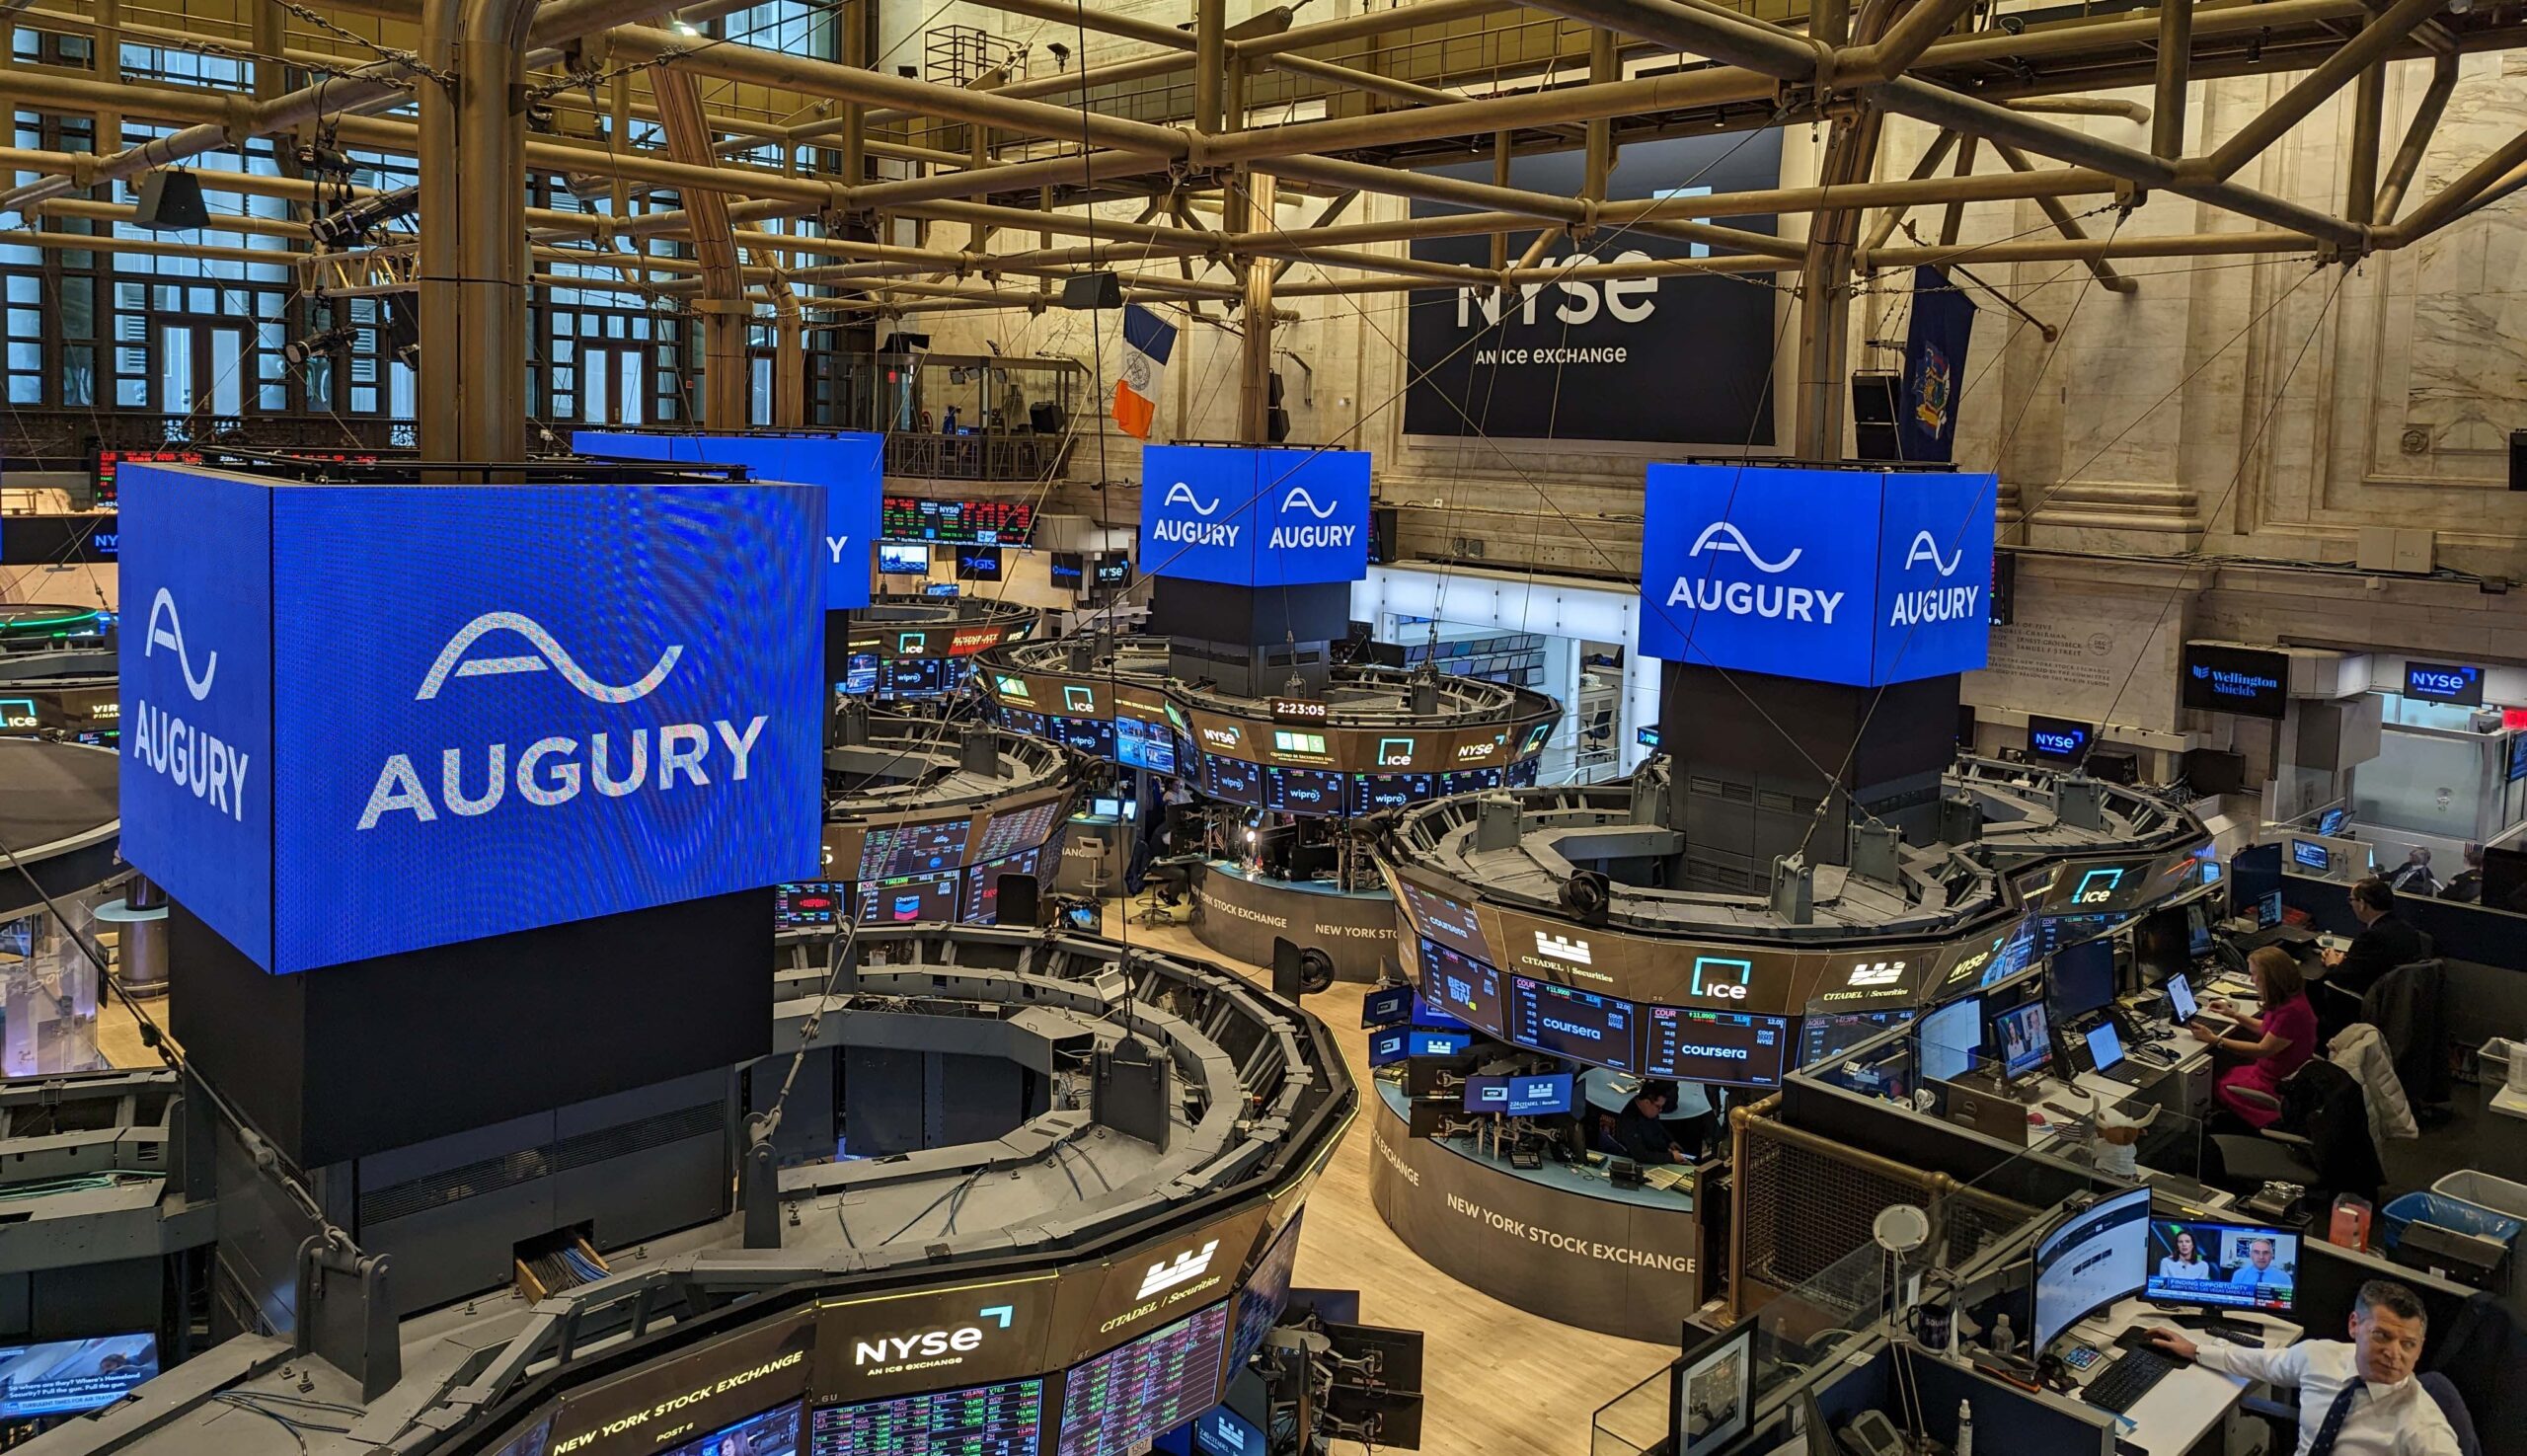 New York Stock Exchange with the Augury logo on all the large screens. 